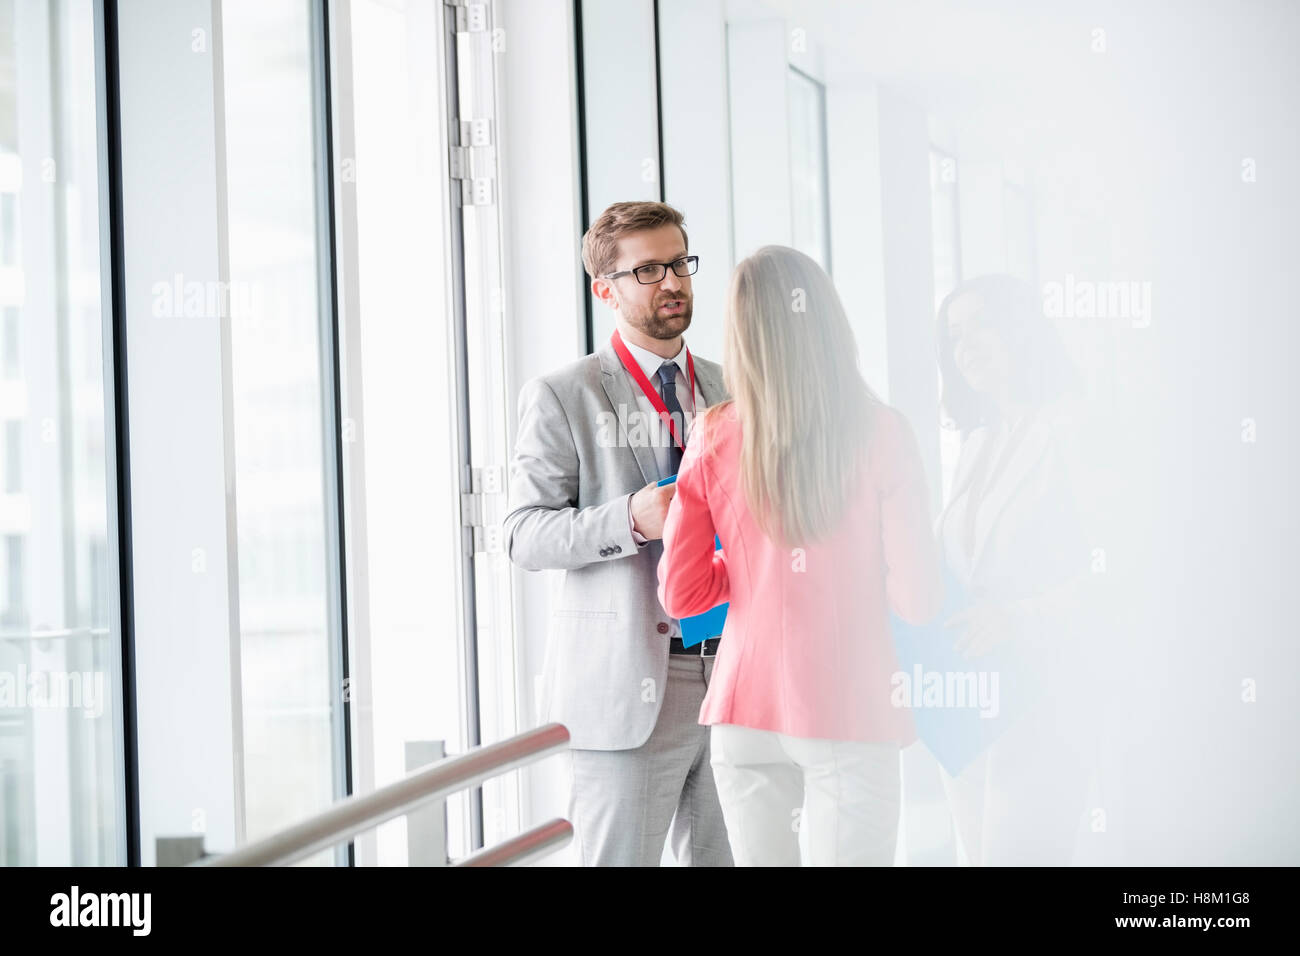 Business people discussing in brightly lit convention center Stock Photo